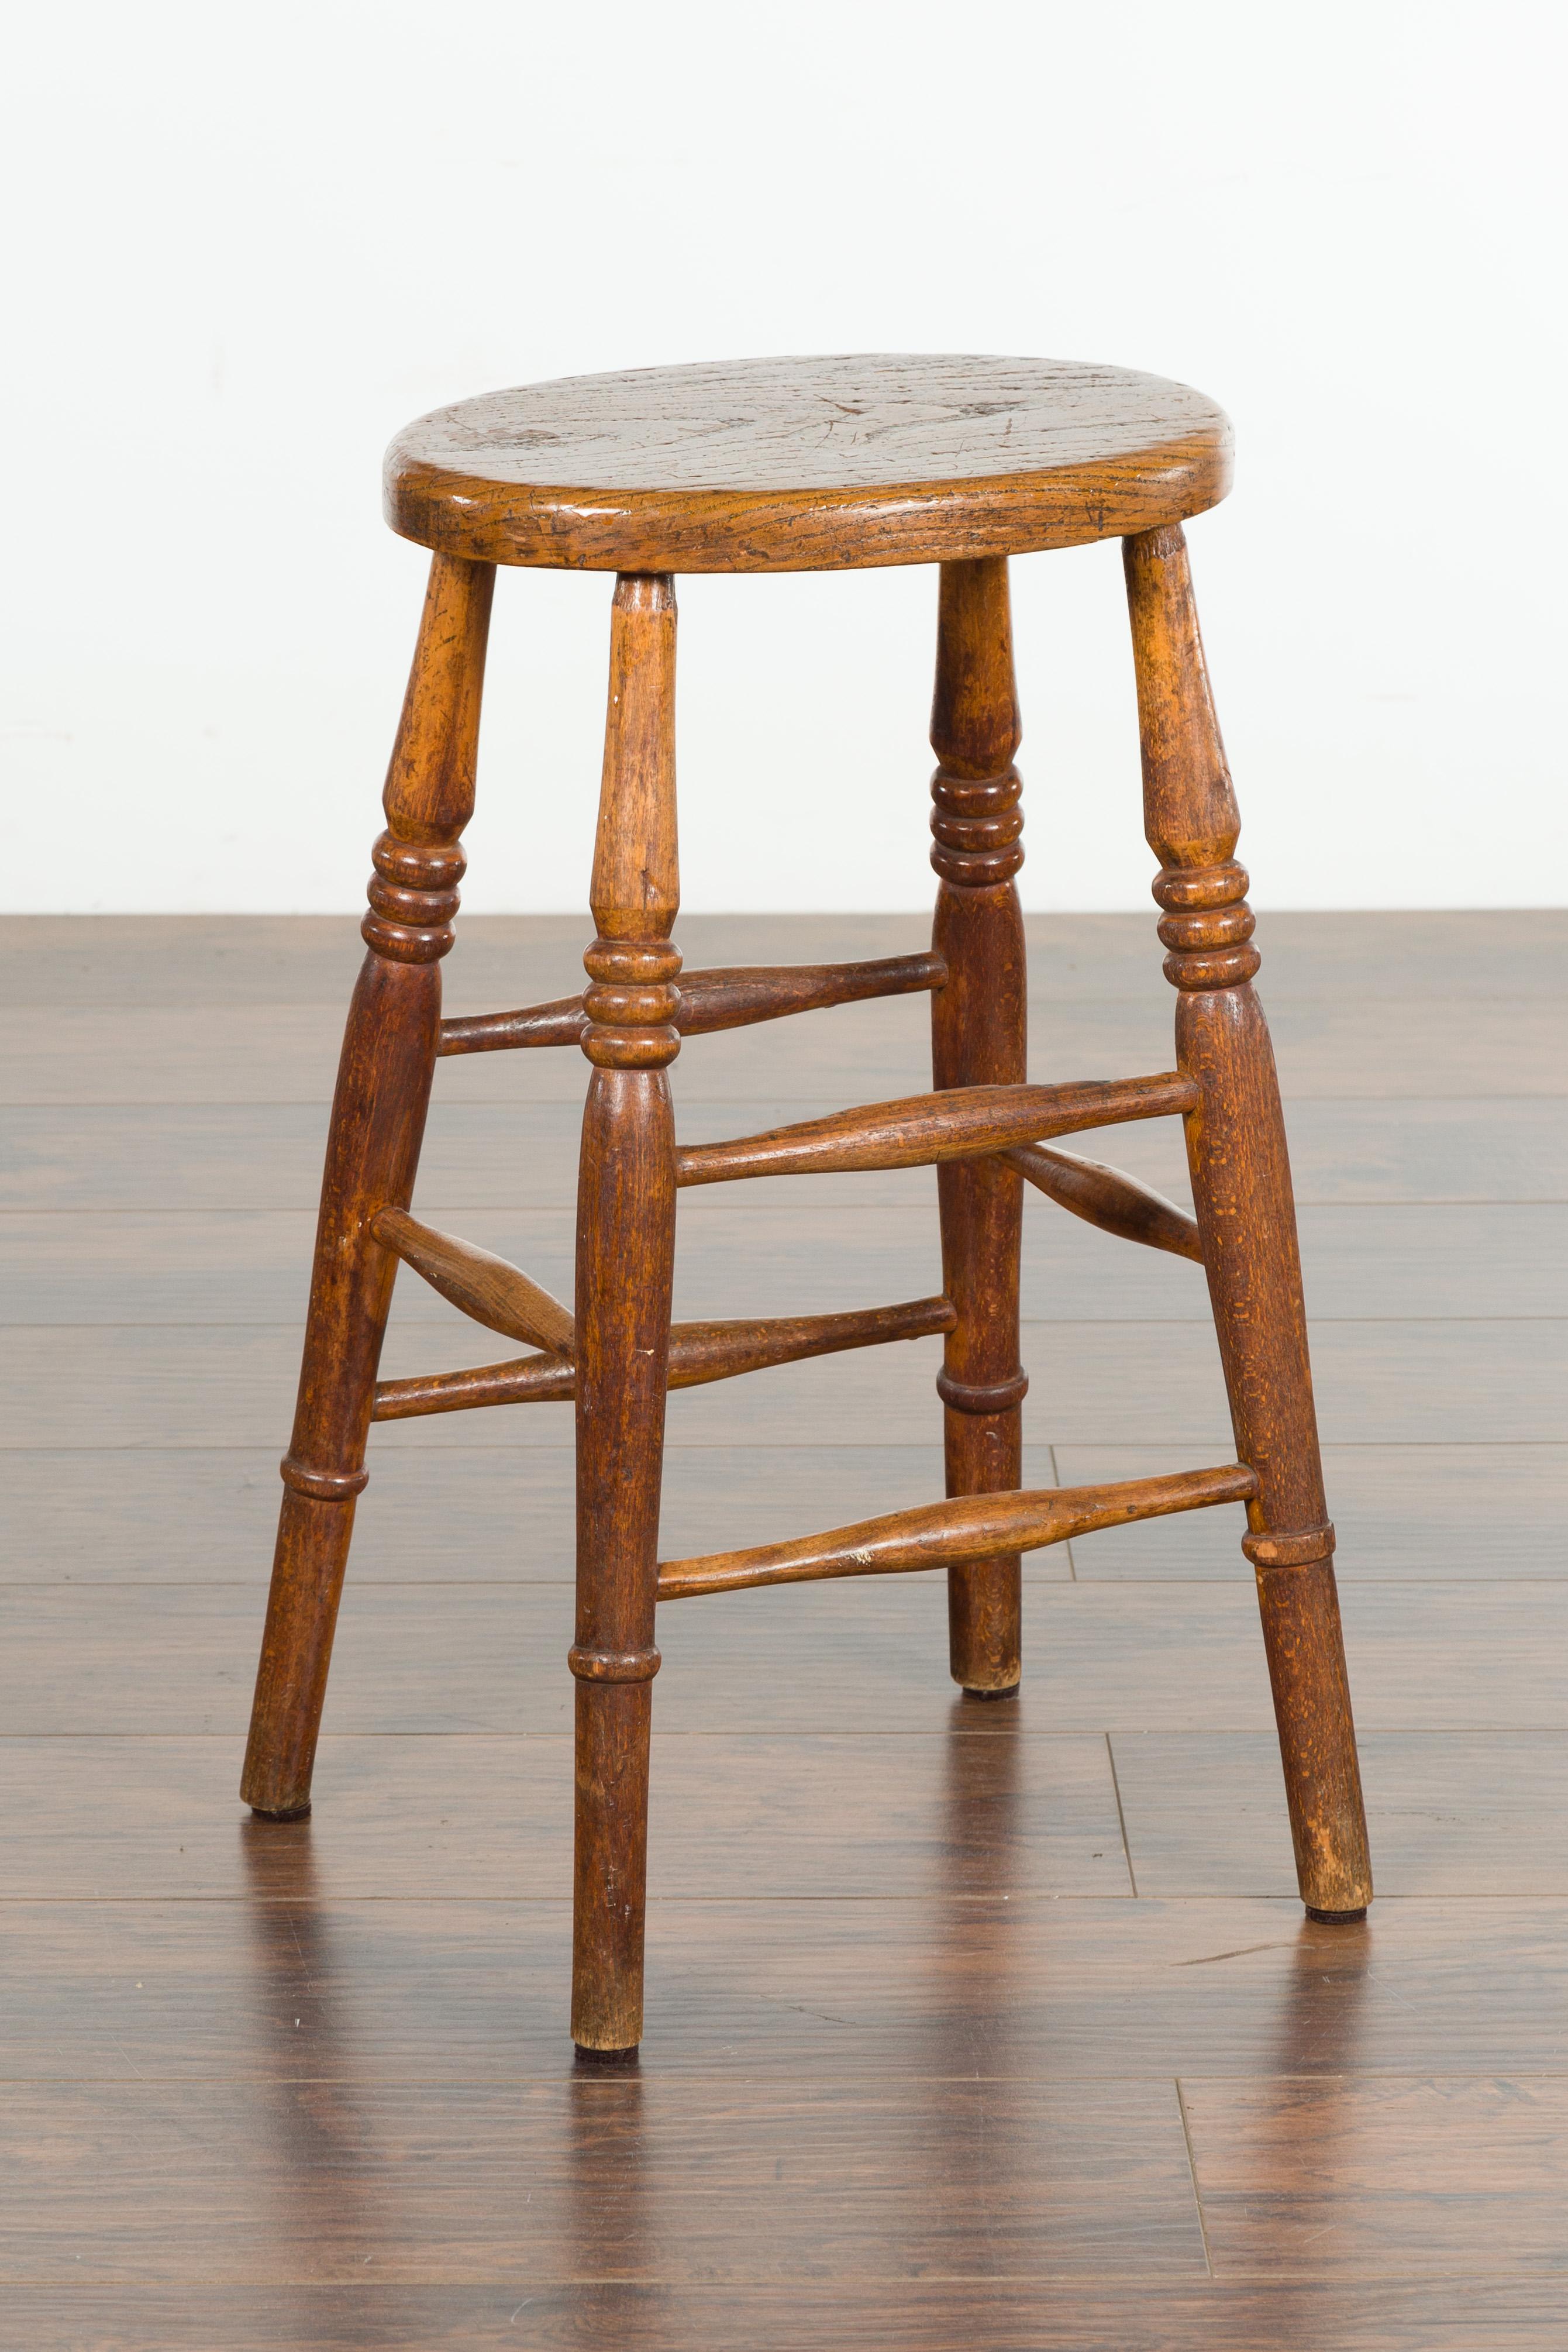 An English elm stool from the late 19th century, with oval seat and turned legs. Created in England during the last quarter of the 19th century, this elm stool charms us with its rustic appearance. An oval seat (measuring 14